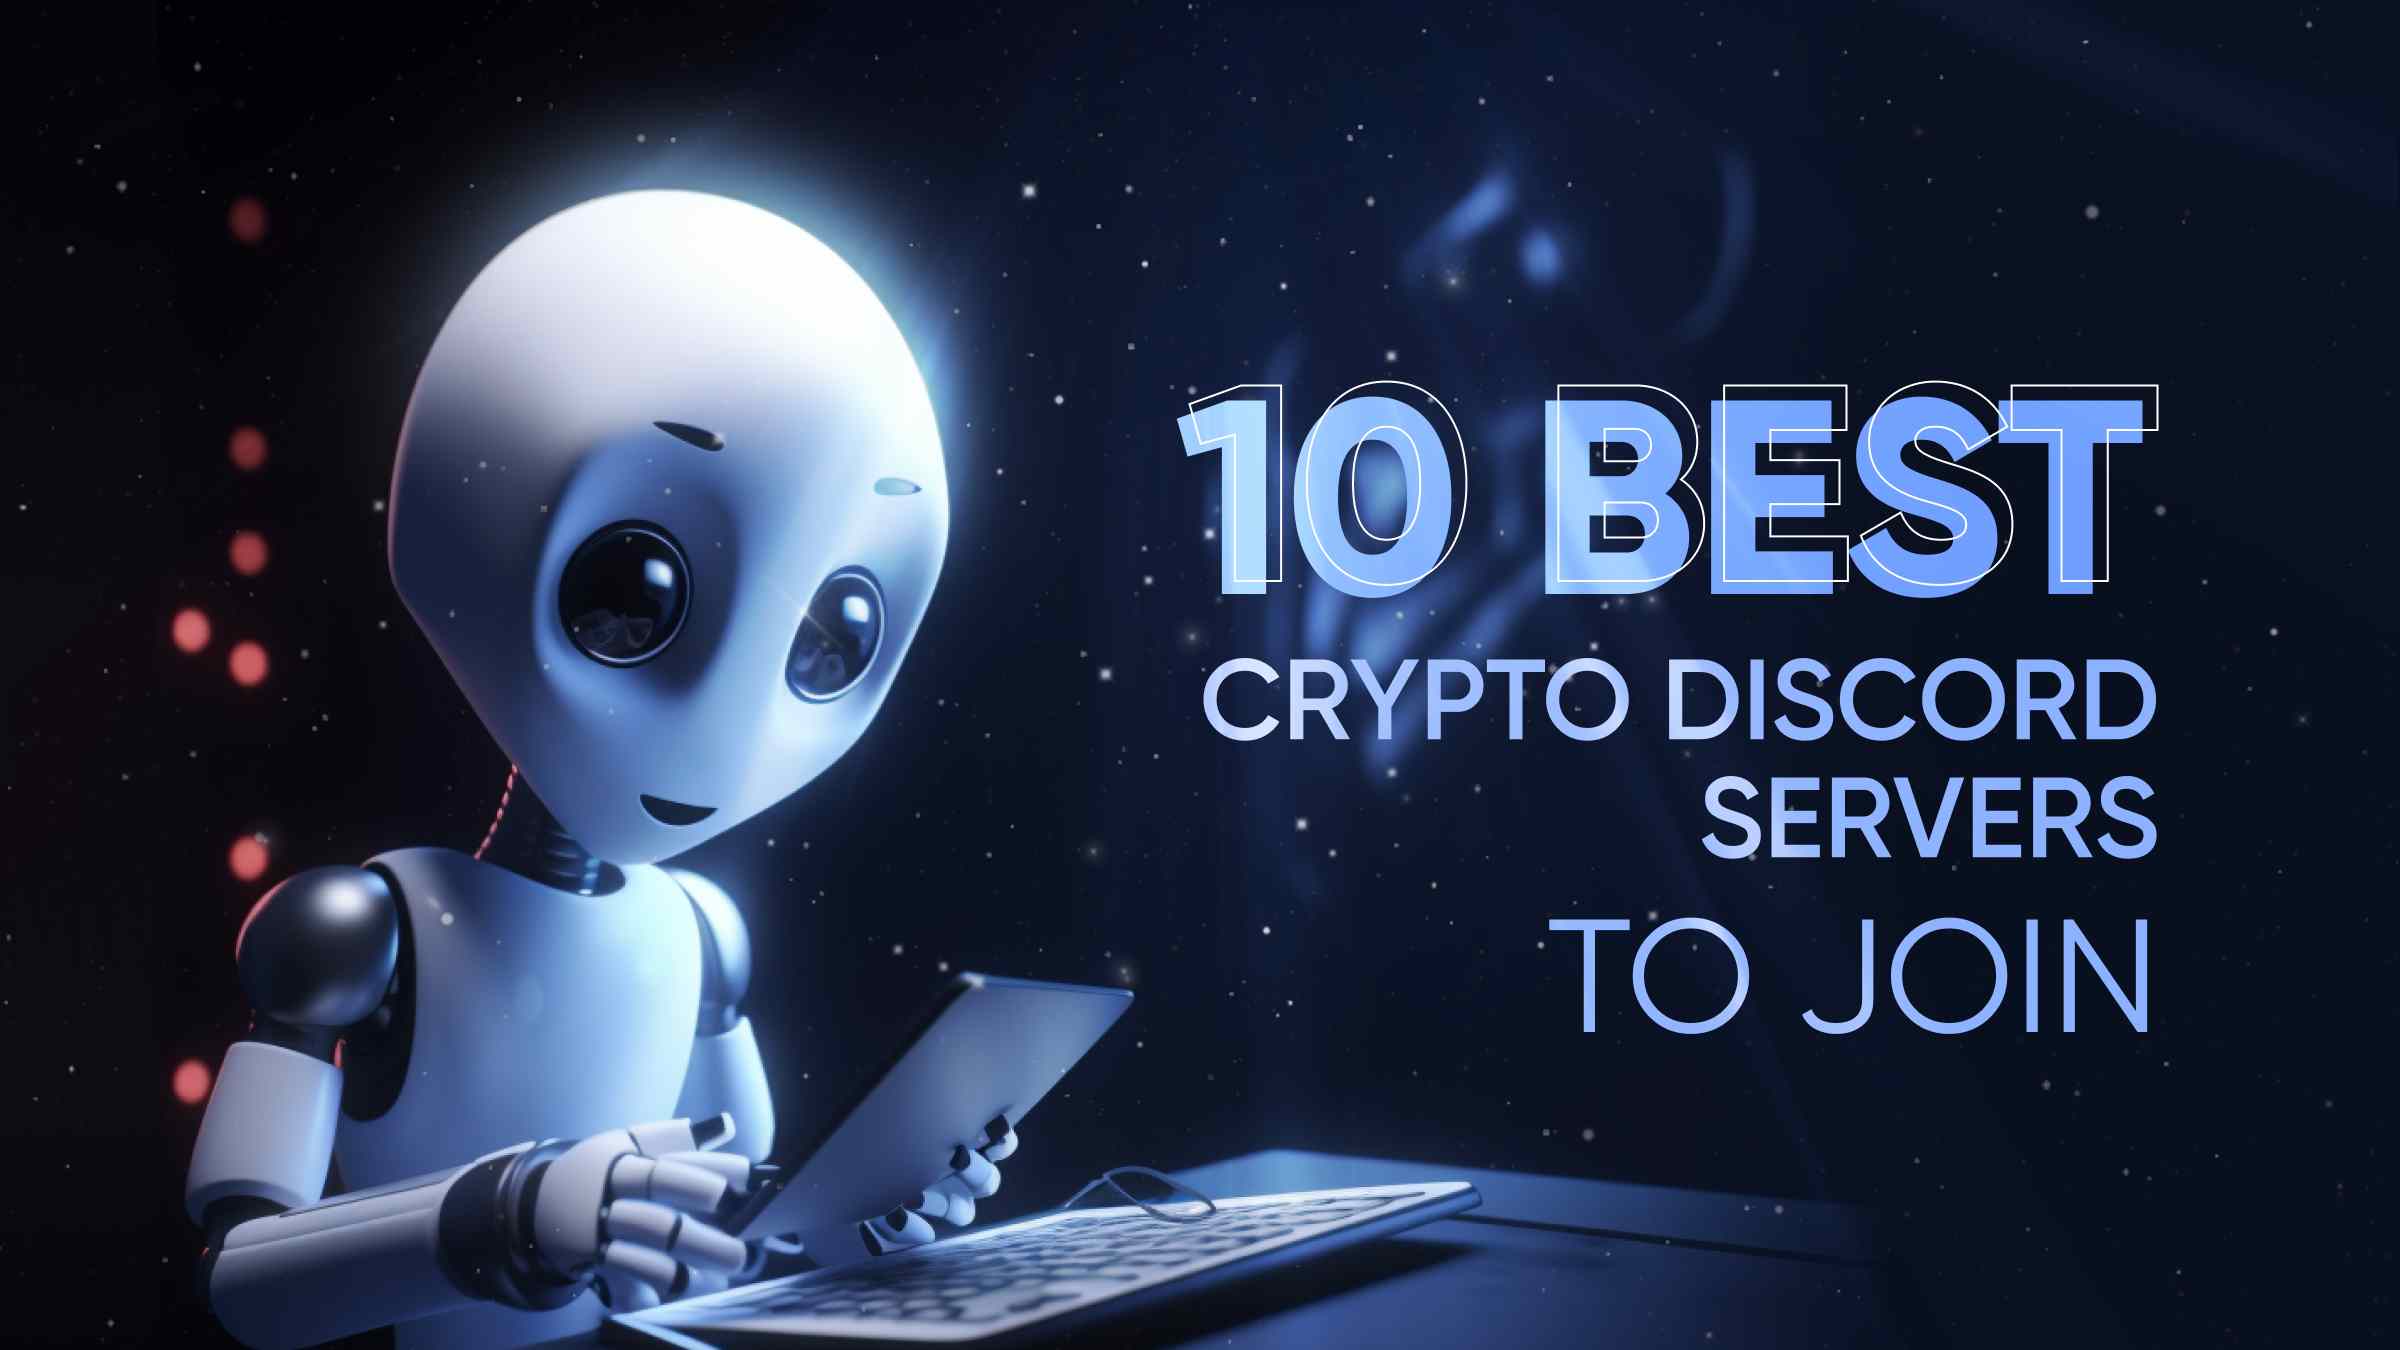 List of Top Reddit Cryptocurrency Subs Which Every Crypto Enthusiast & Investor Must Follow